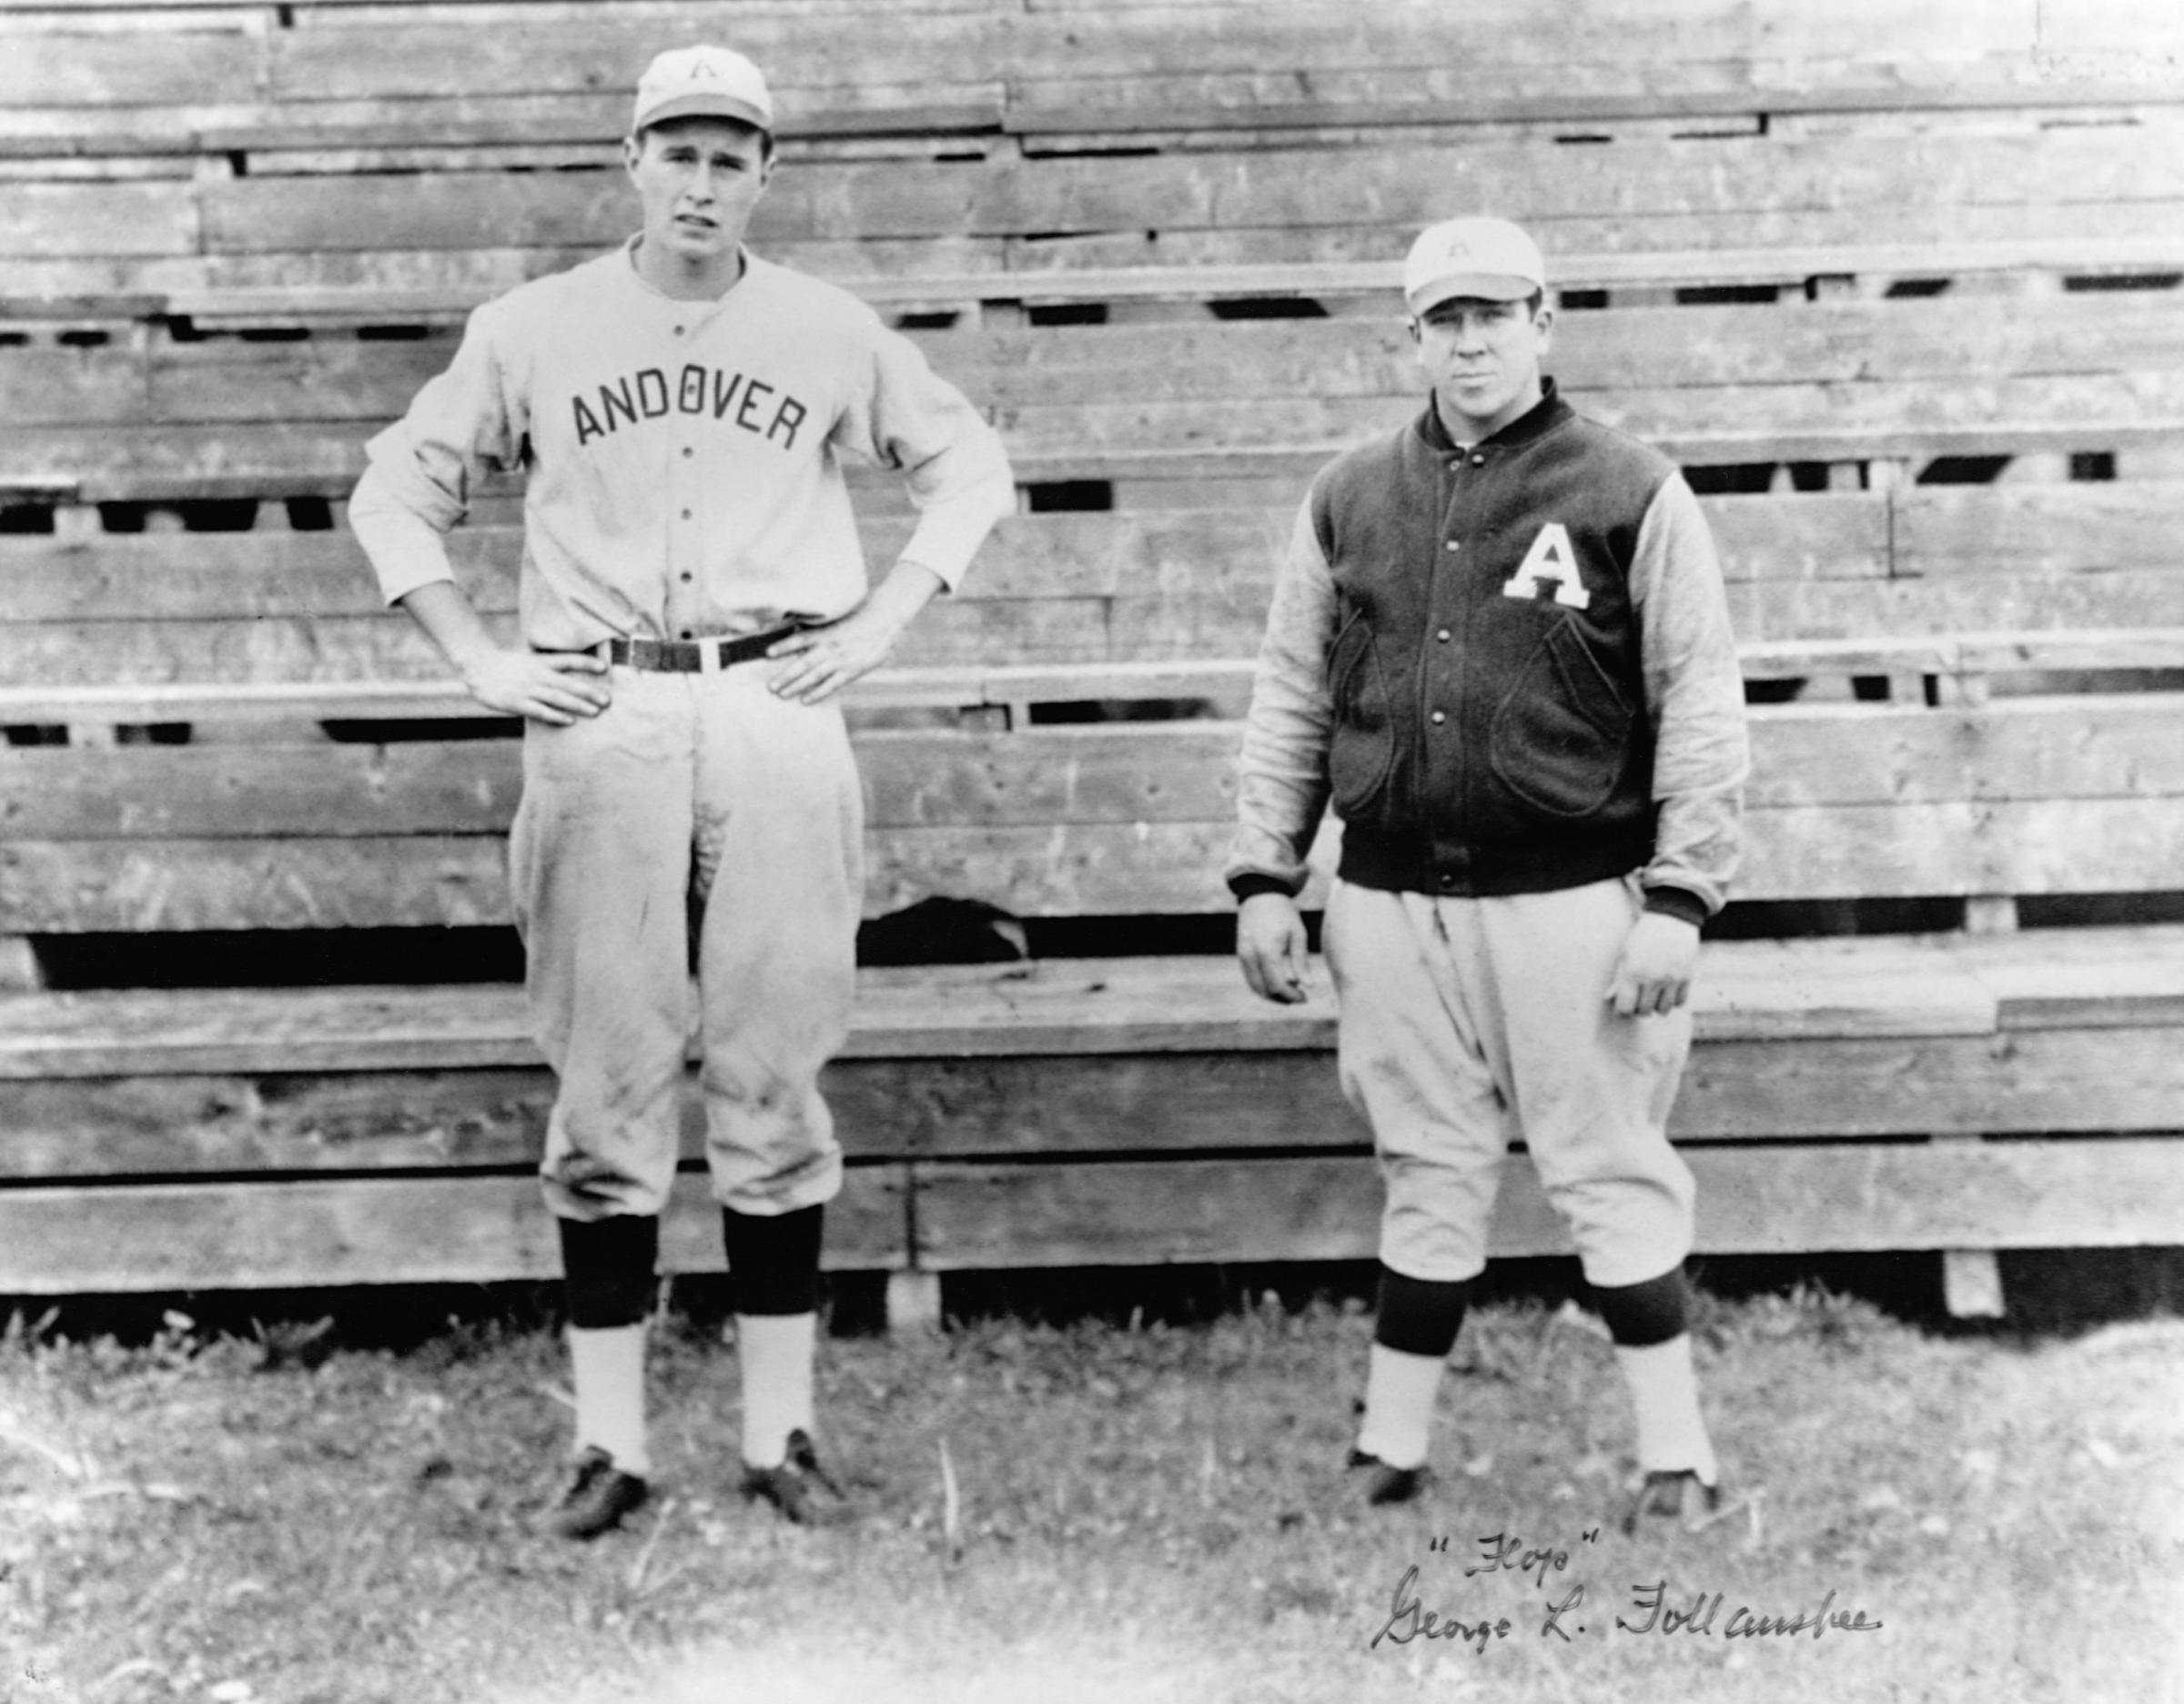 A portrait of an adolescent George H.W. Bush and a teammate in their baseball uniforms. Bush was the captain of the baseball team at Phillips Academy, where he attended from 1937 to 1942.